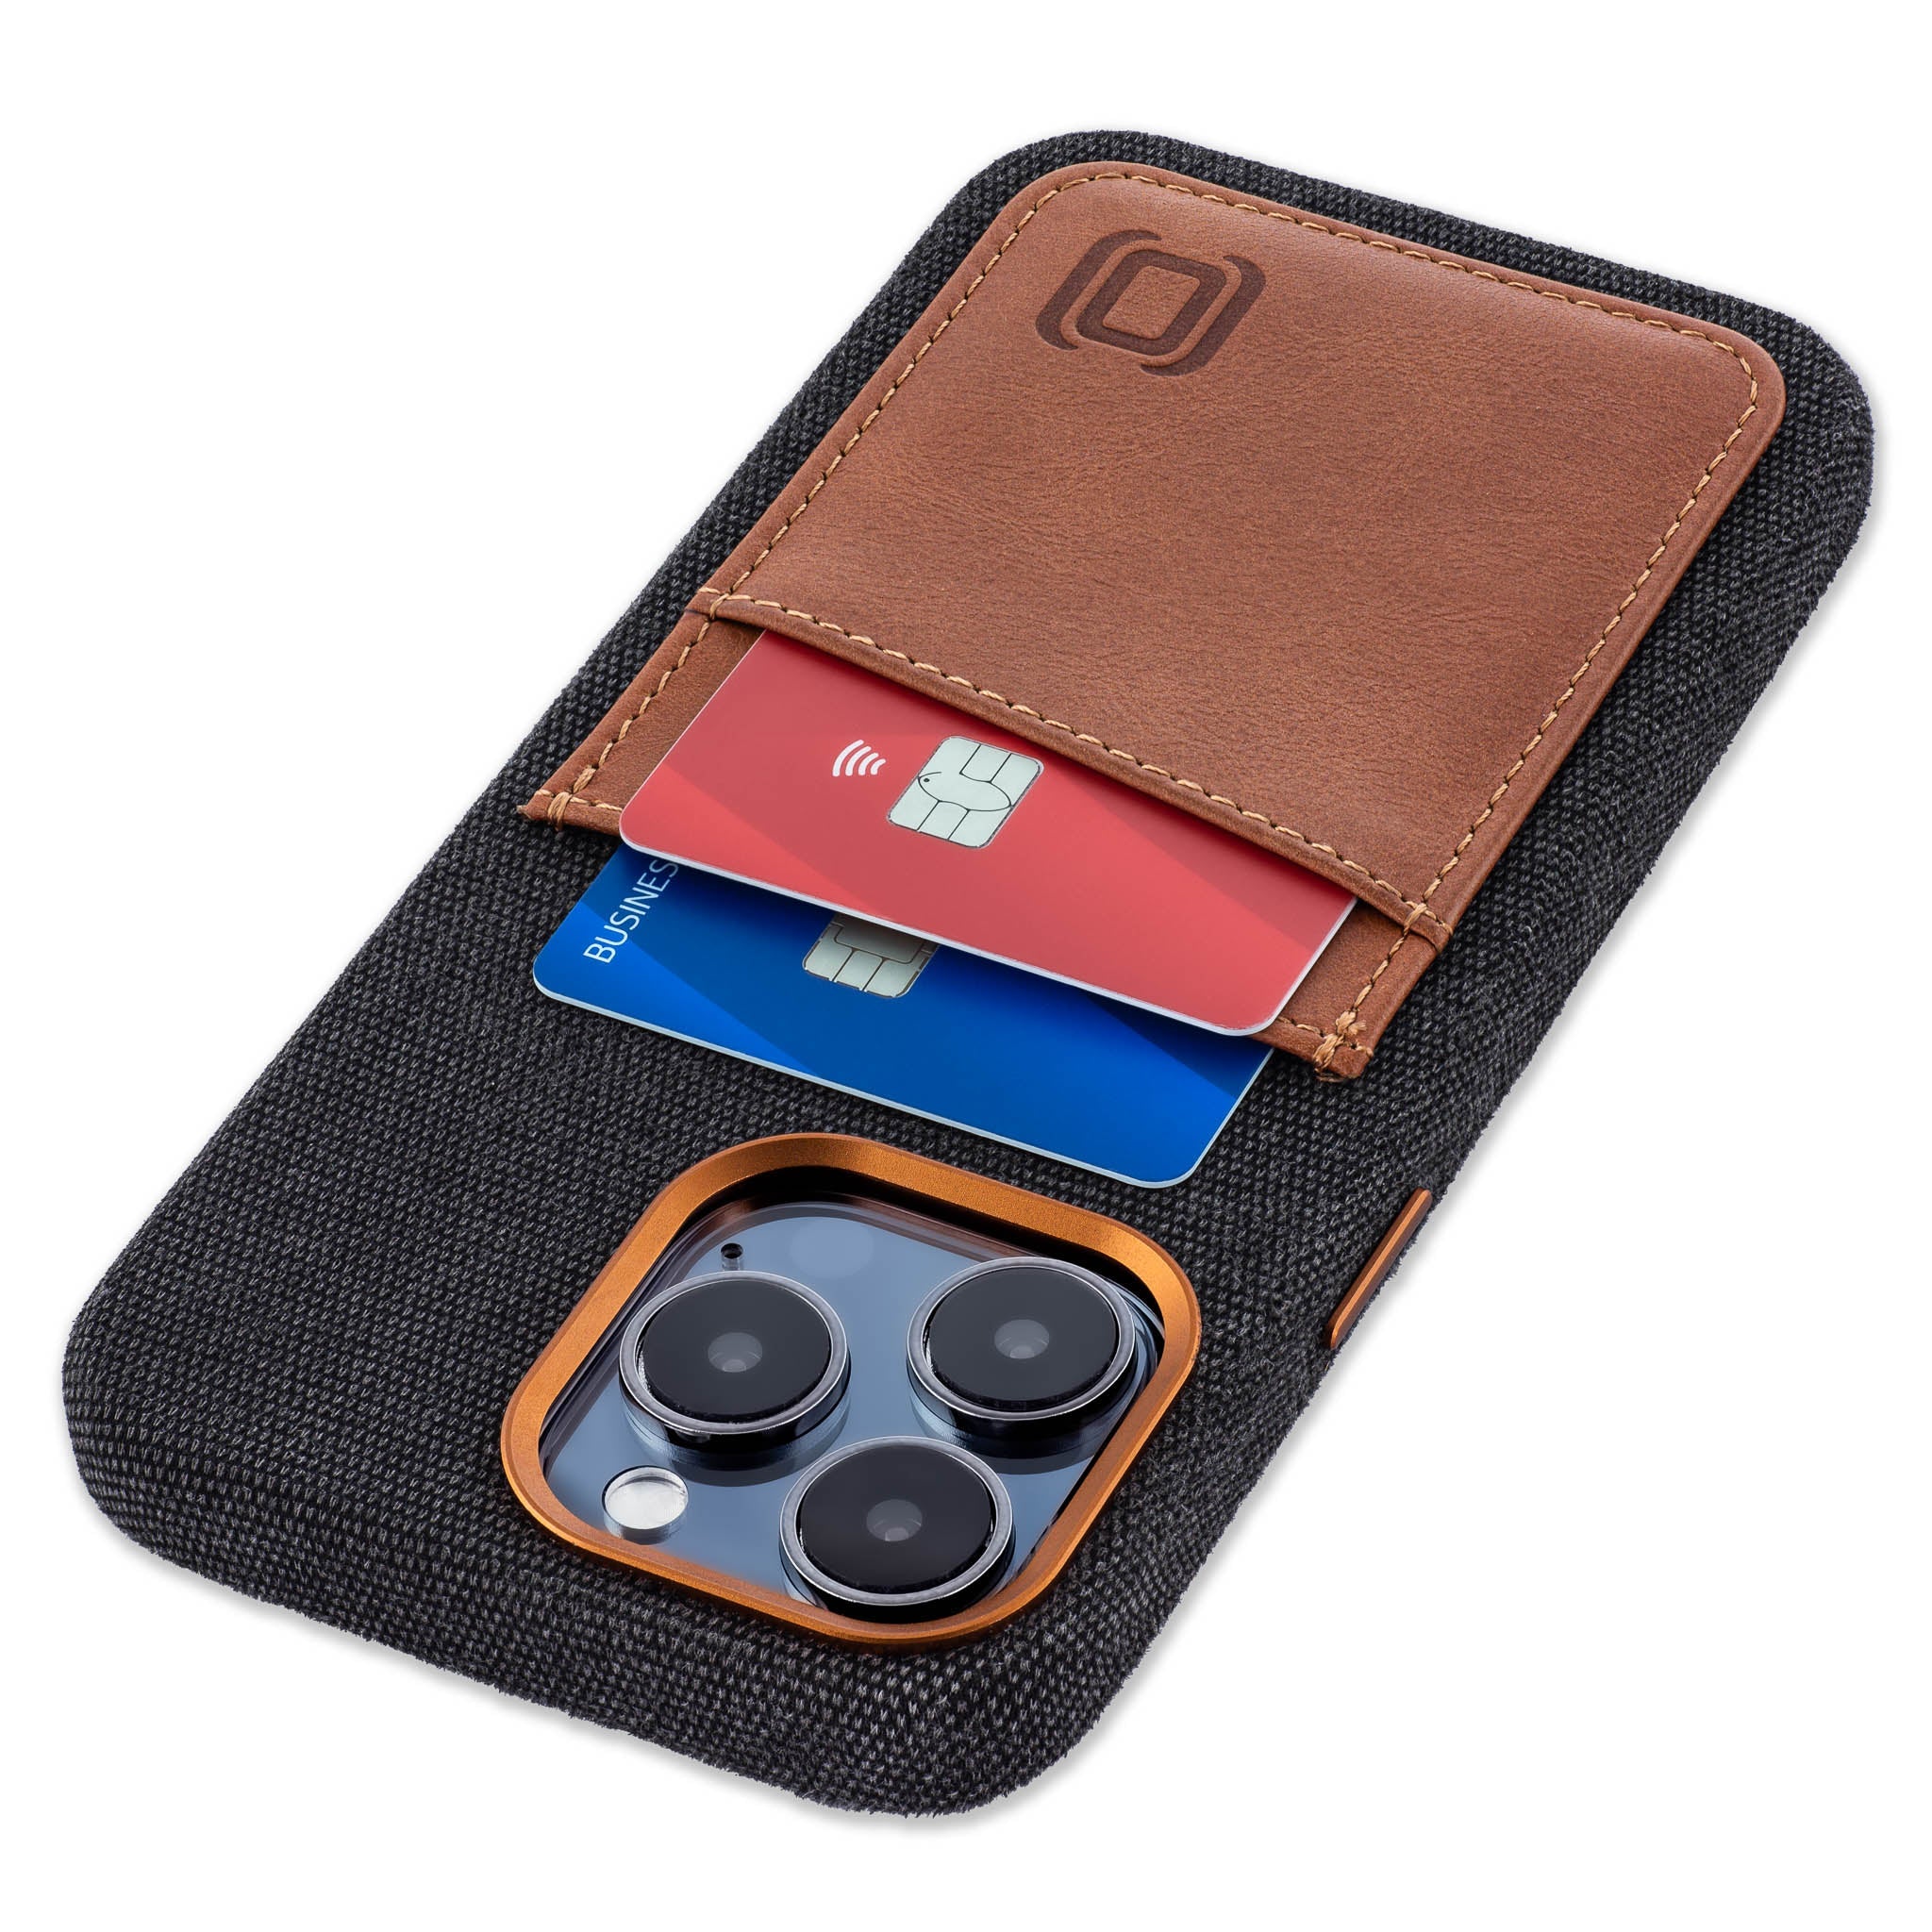 Dockem Fabric Wallet Case for The iPhone 13 Pro Max (M2F)